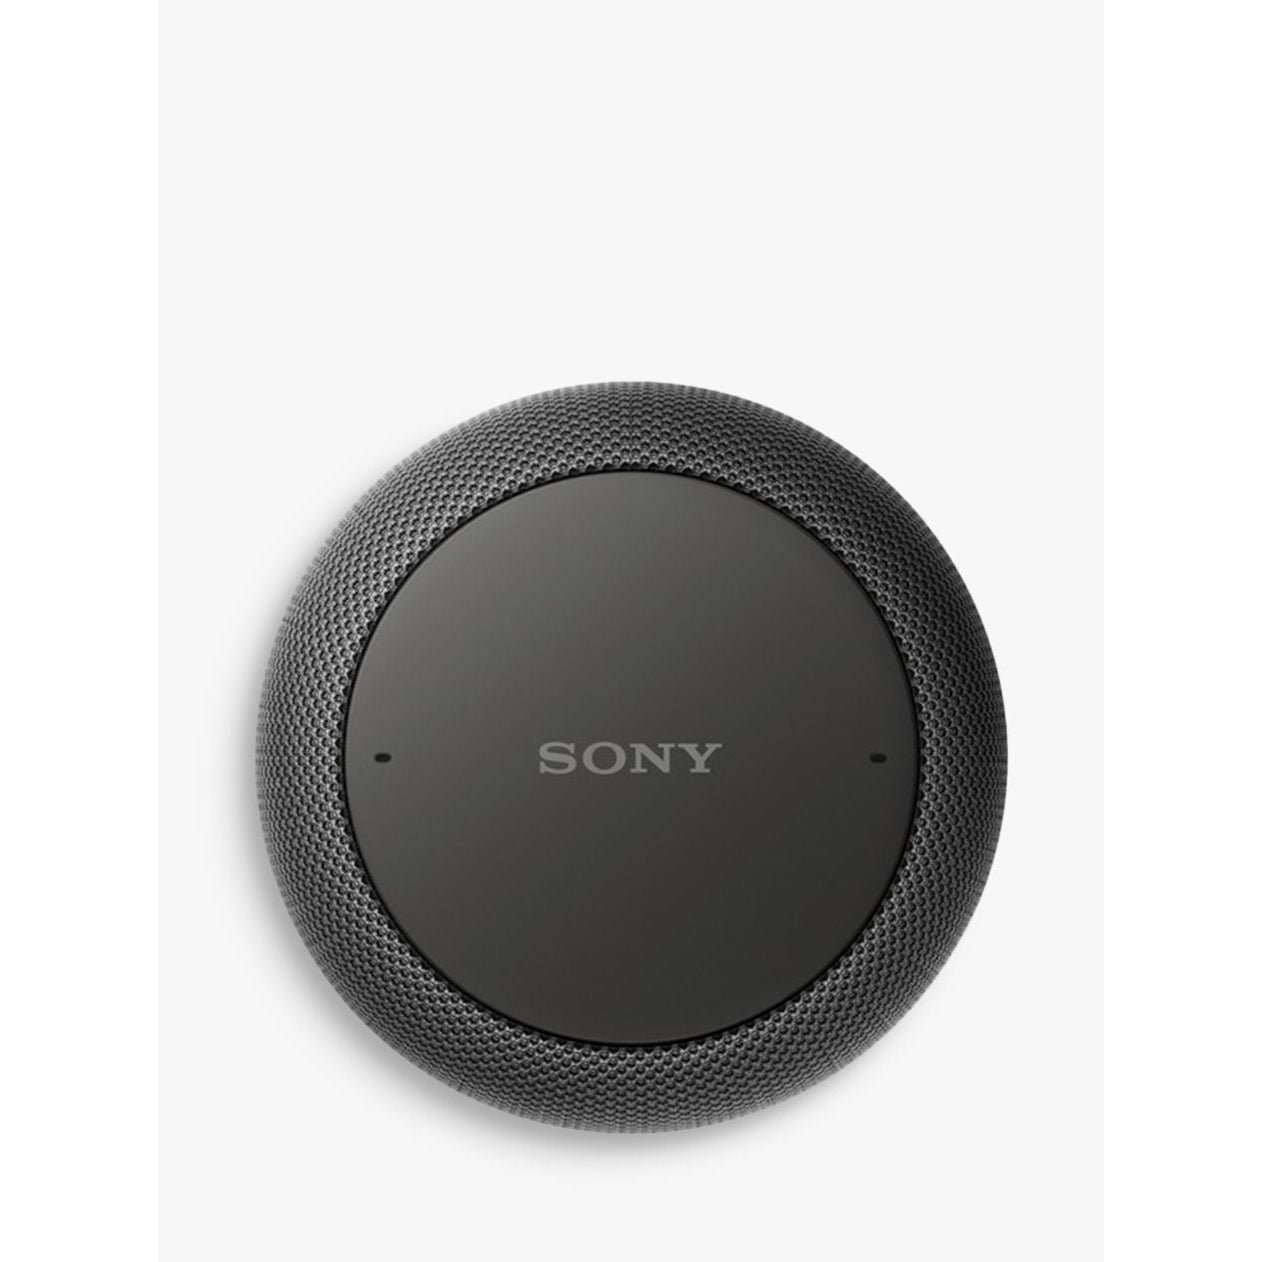 Sony LF-S50G Smart Speaker with Built-in Google Assistant, Grey